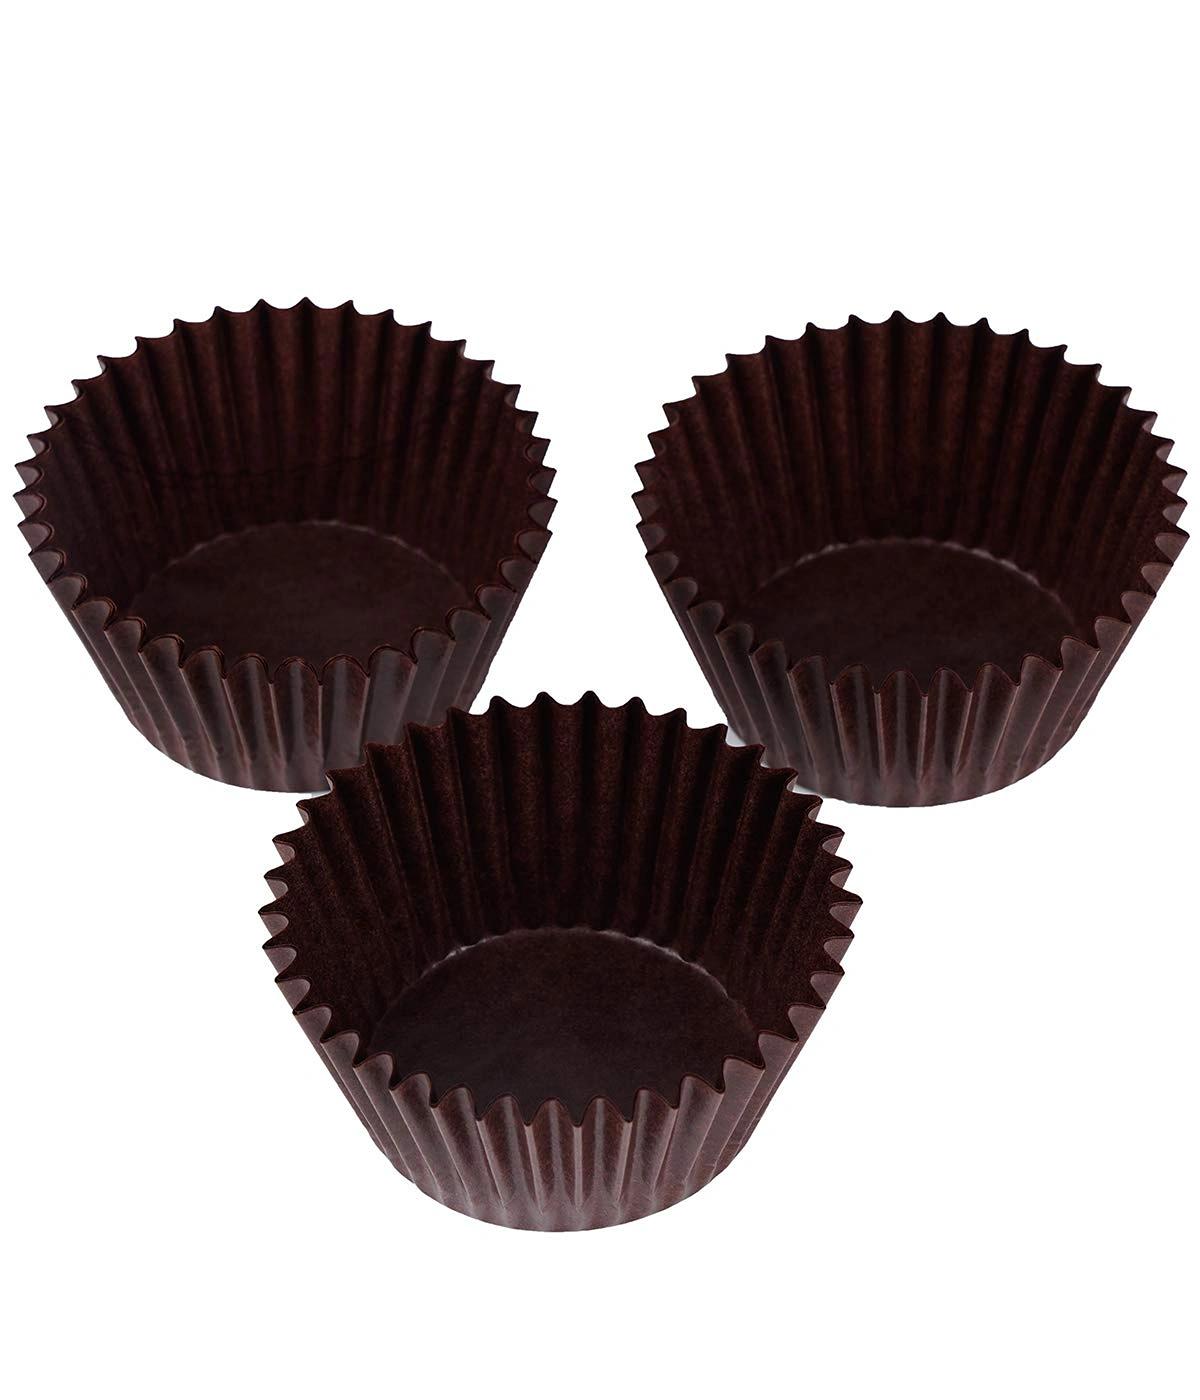 Perfect Bakeware Round Paper Baking Muffin Cupcake Greaseproof Oven Safe - Pack of 500 (Brown)